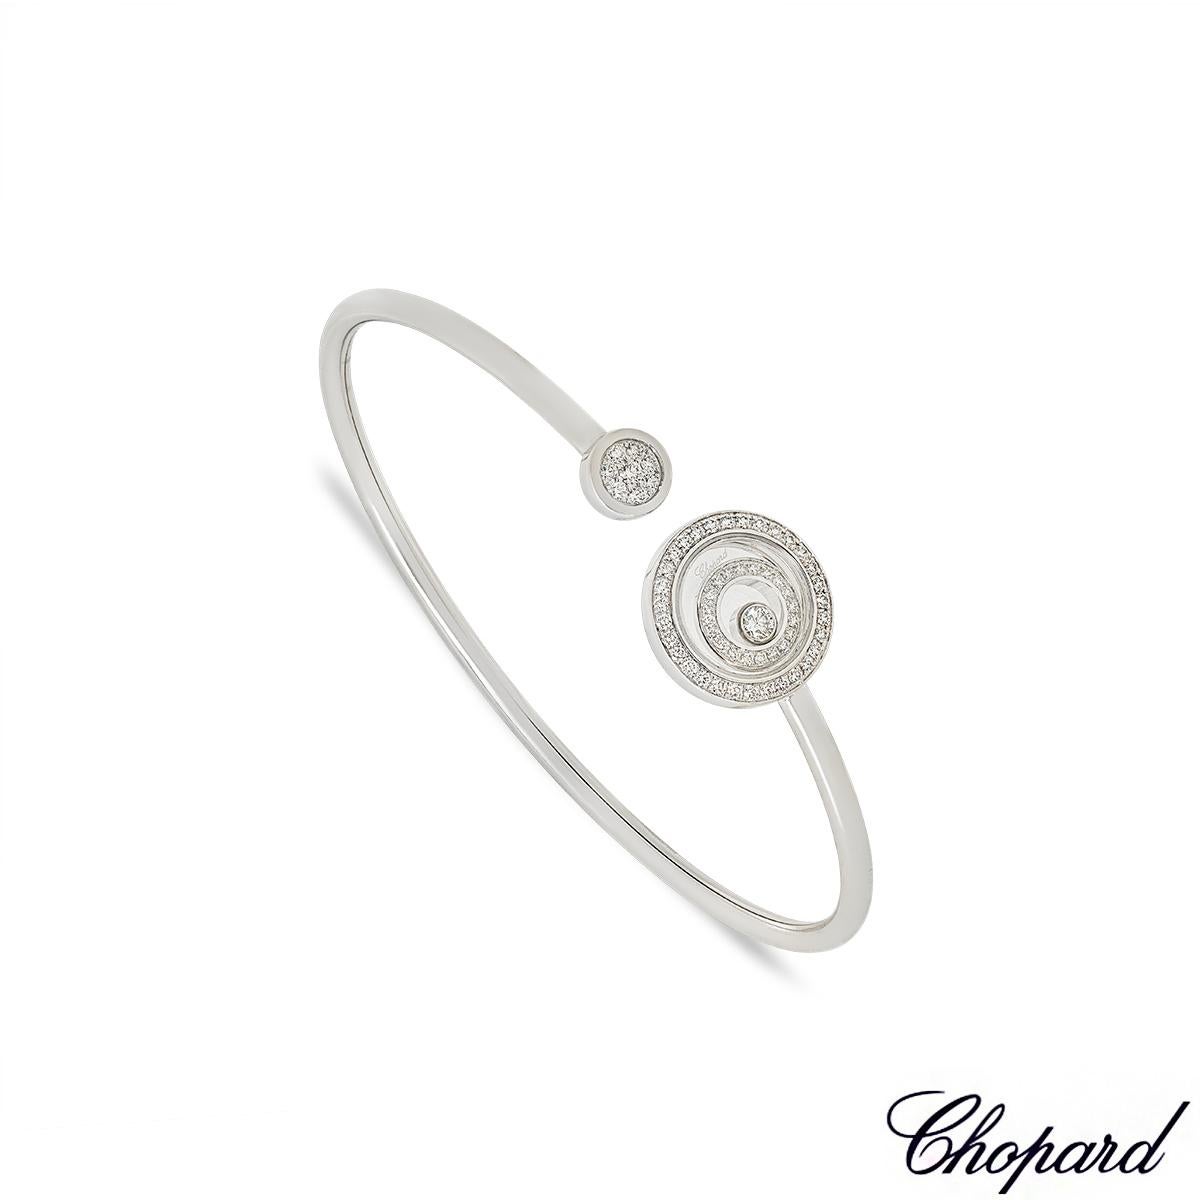 A beautiful Chopard 18k white gold diamond cuff bangle from the Happy Spirit collection. The cuff style bangle has a circular shaped talisman on either end, one with a floating round brilliant cut diamond inside a floating surround encased behind